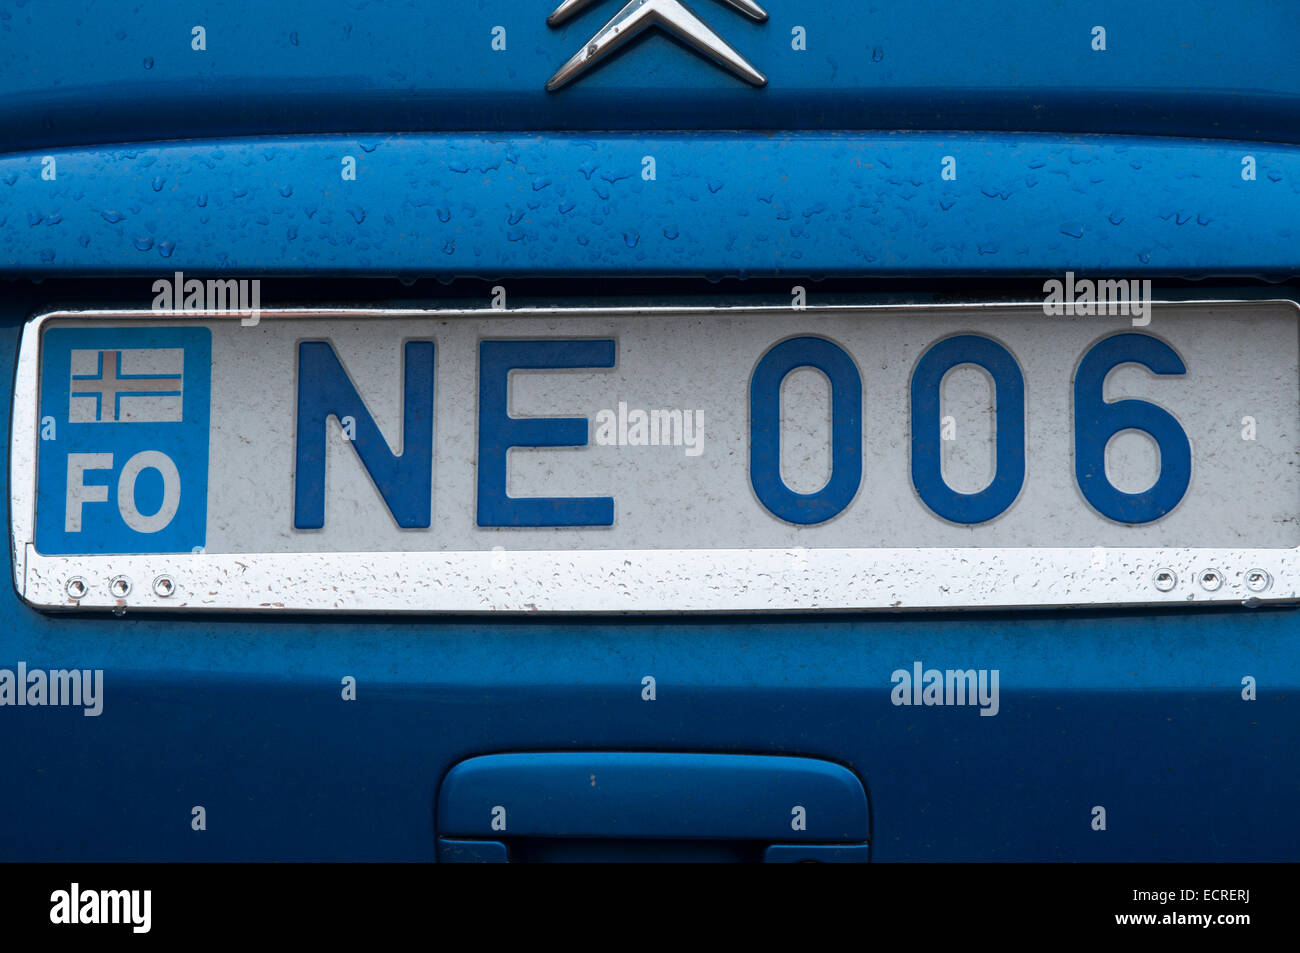 The Faroe Islands is an archipelago in the Norwegian Sea.  Own license plates demonstrate the sovereignty of these islands. Stock Photo